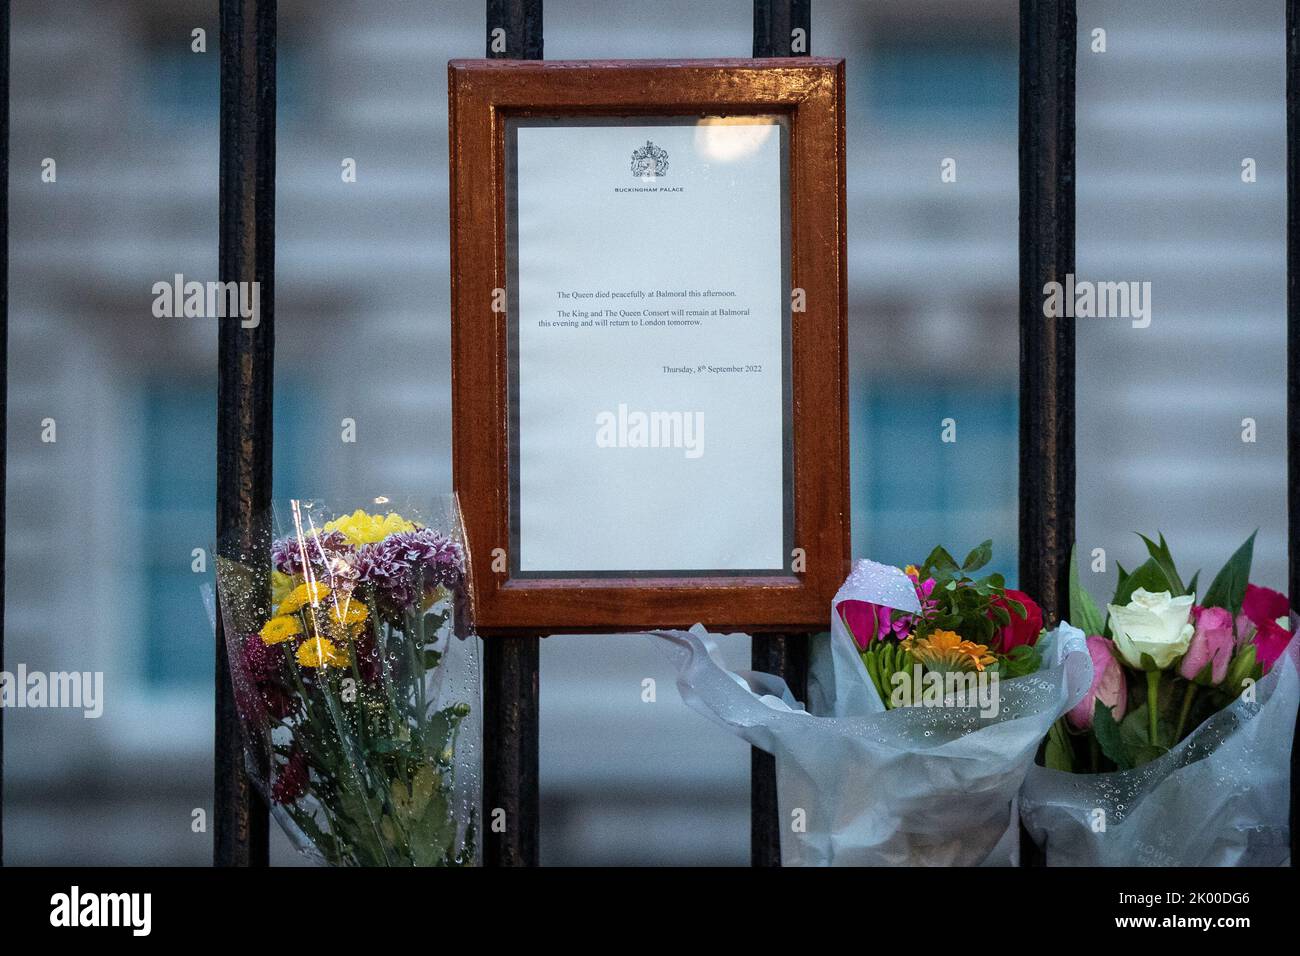 A notice of the queens death after the passing of Her Majesty The Queen at Buckingham Palace, London, United Kingdom, 9th September 2022   (Photo by Ben Whitley/News Images) Stock Photo